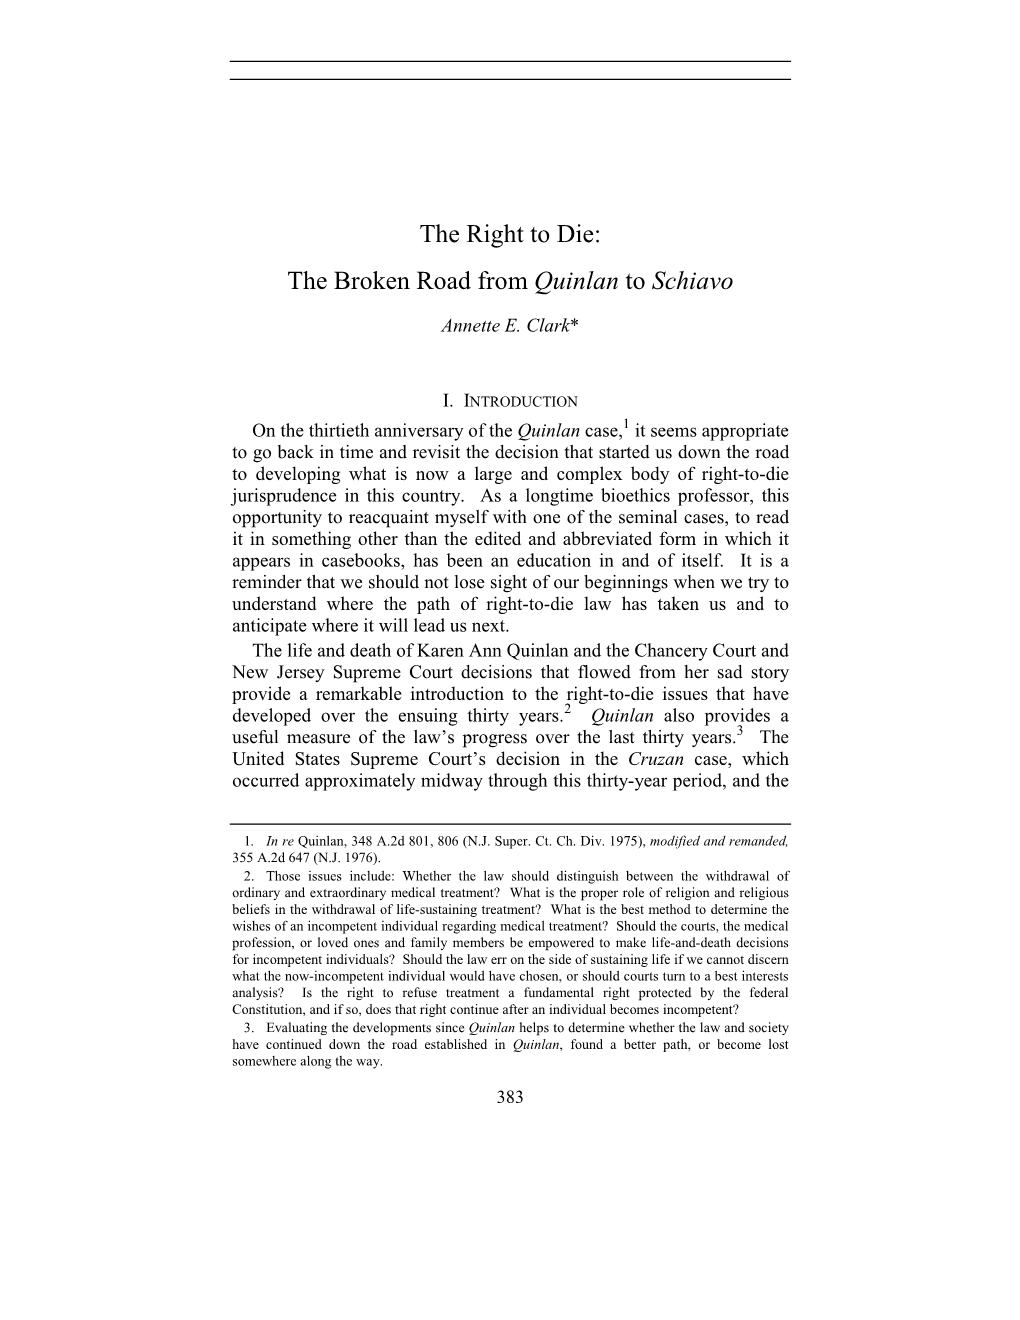 The Right to Die: the Broken Road from Quinlan to Schiavo